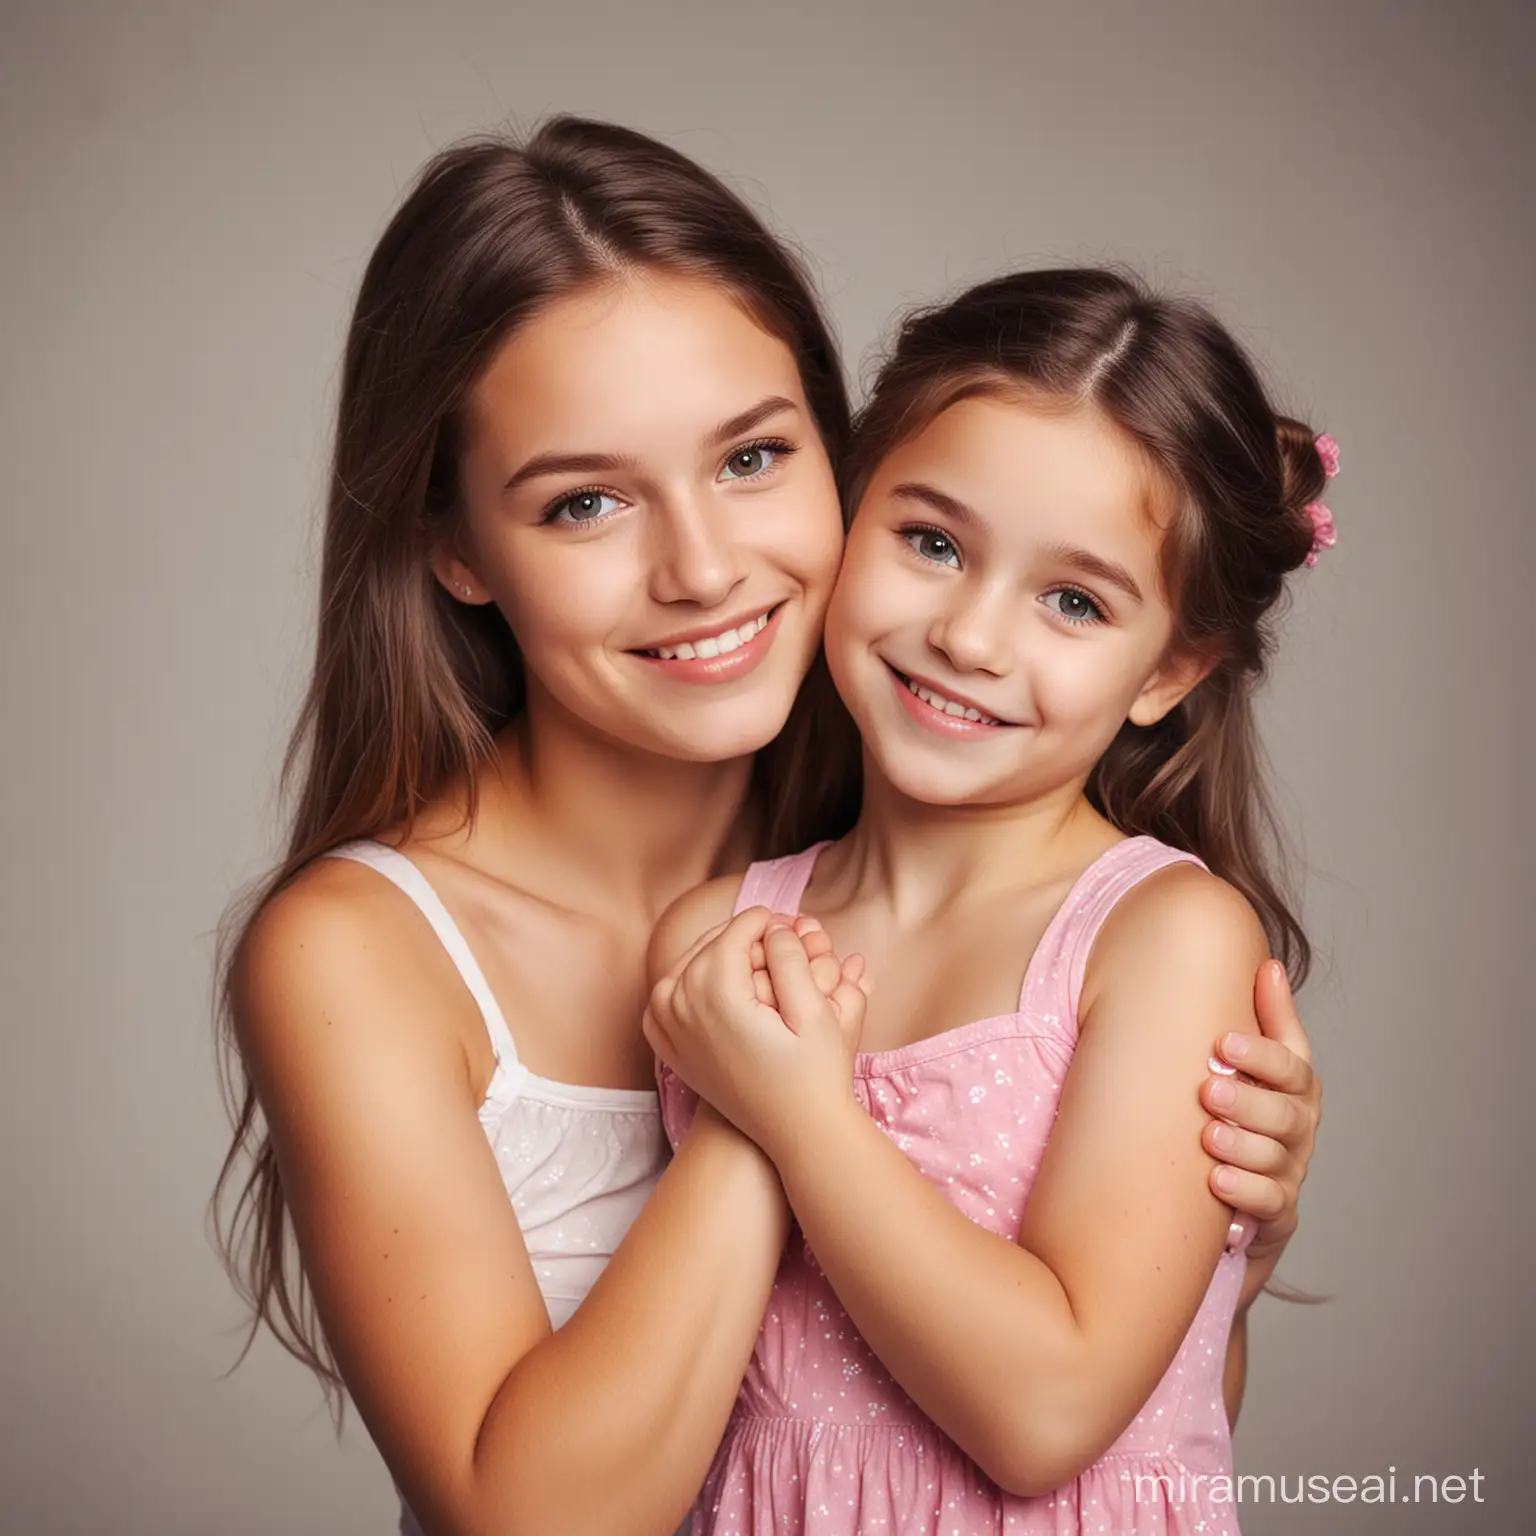 Cute teen girl holding a small cute young woman in her palms